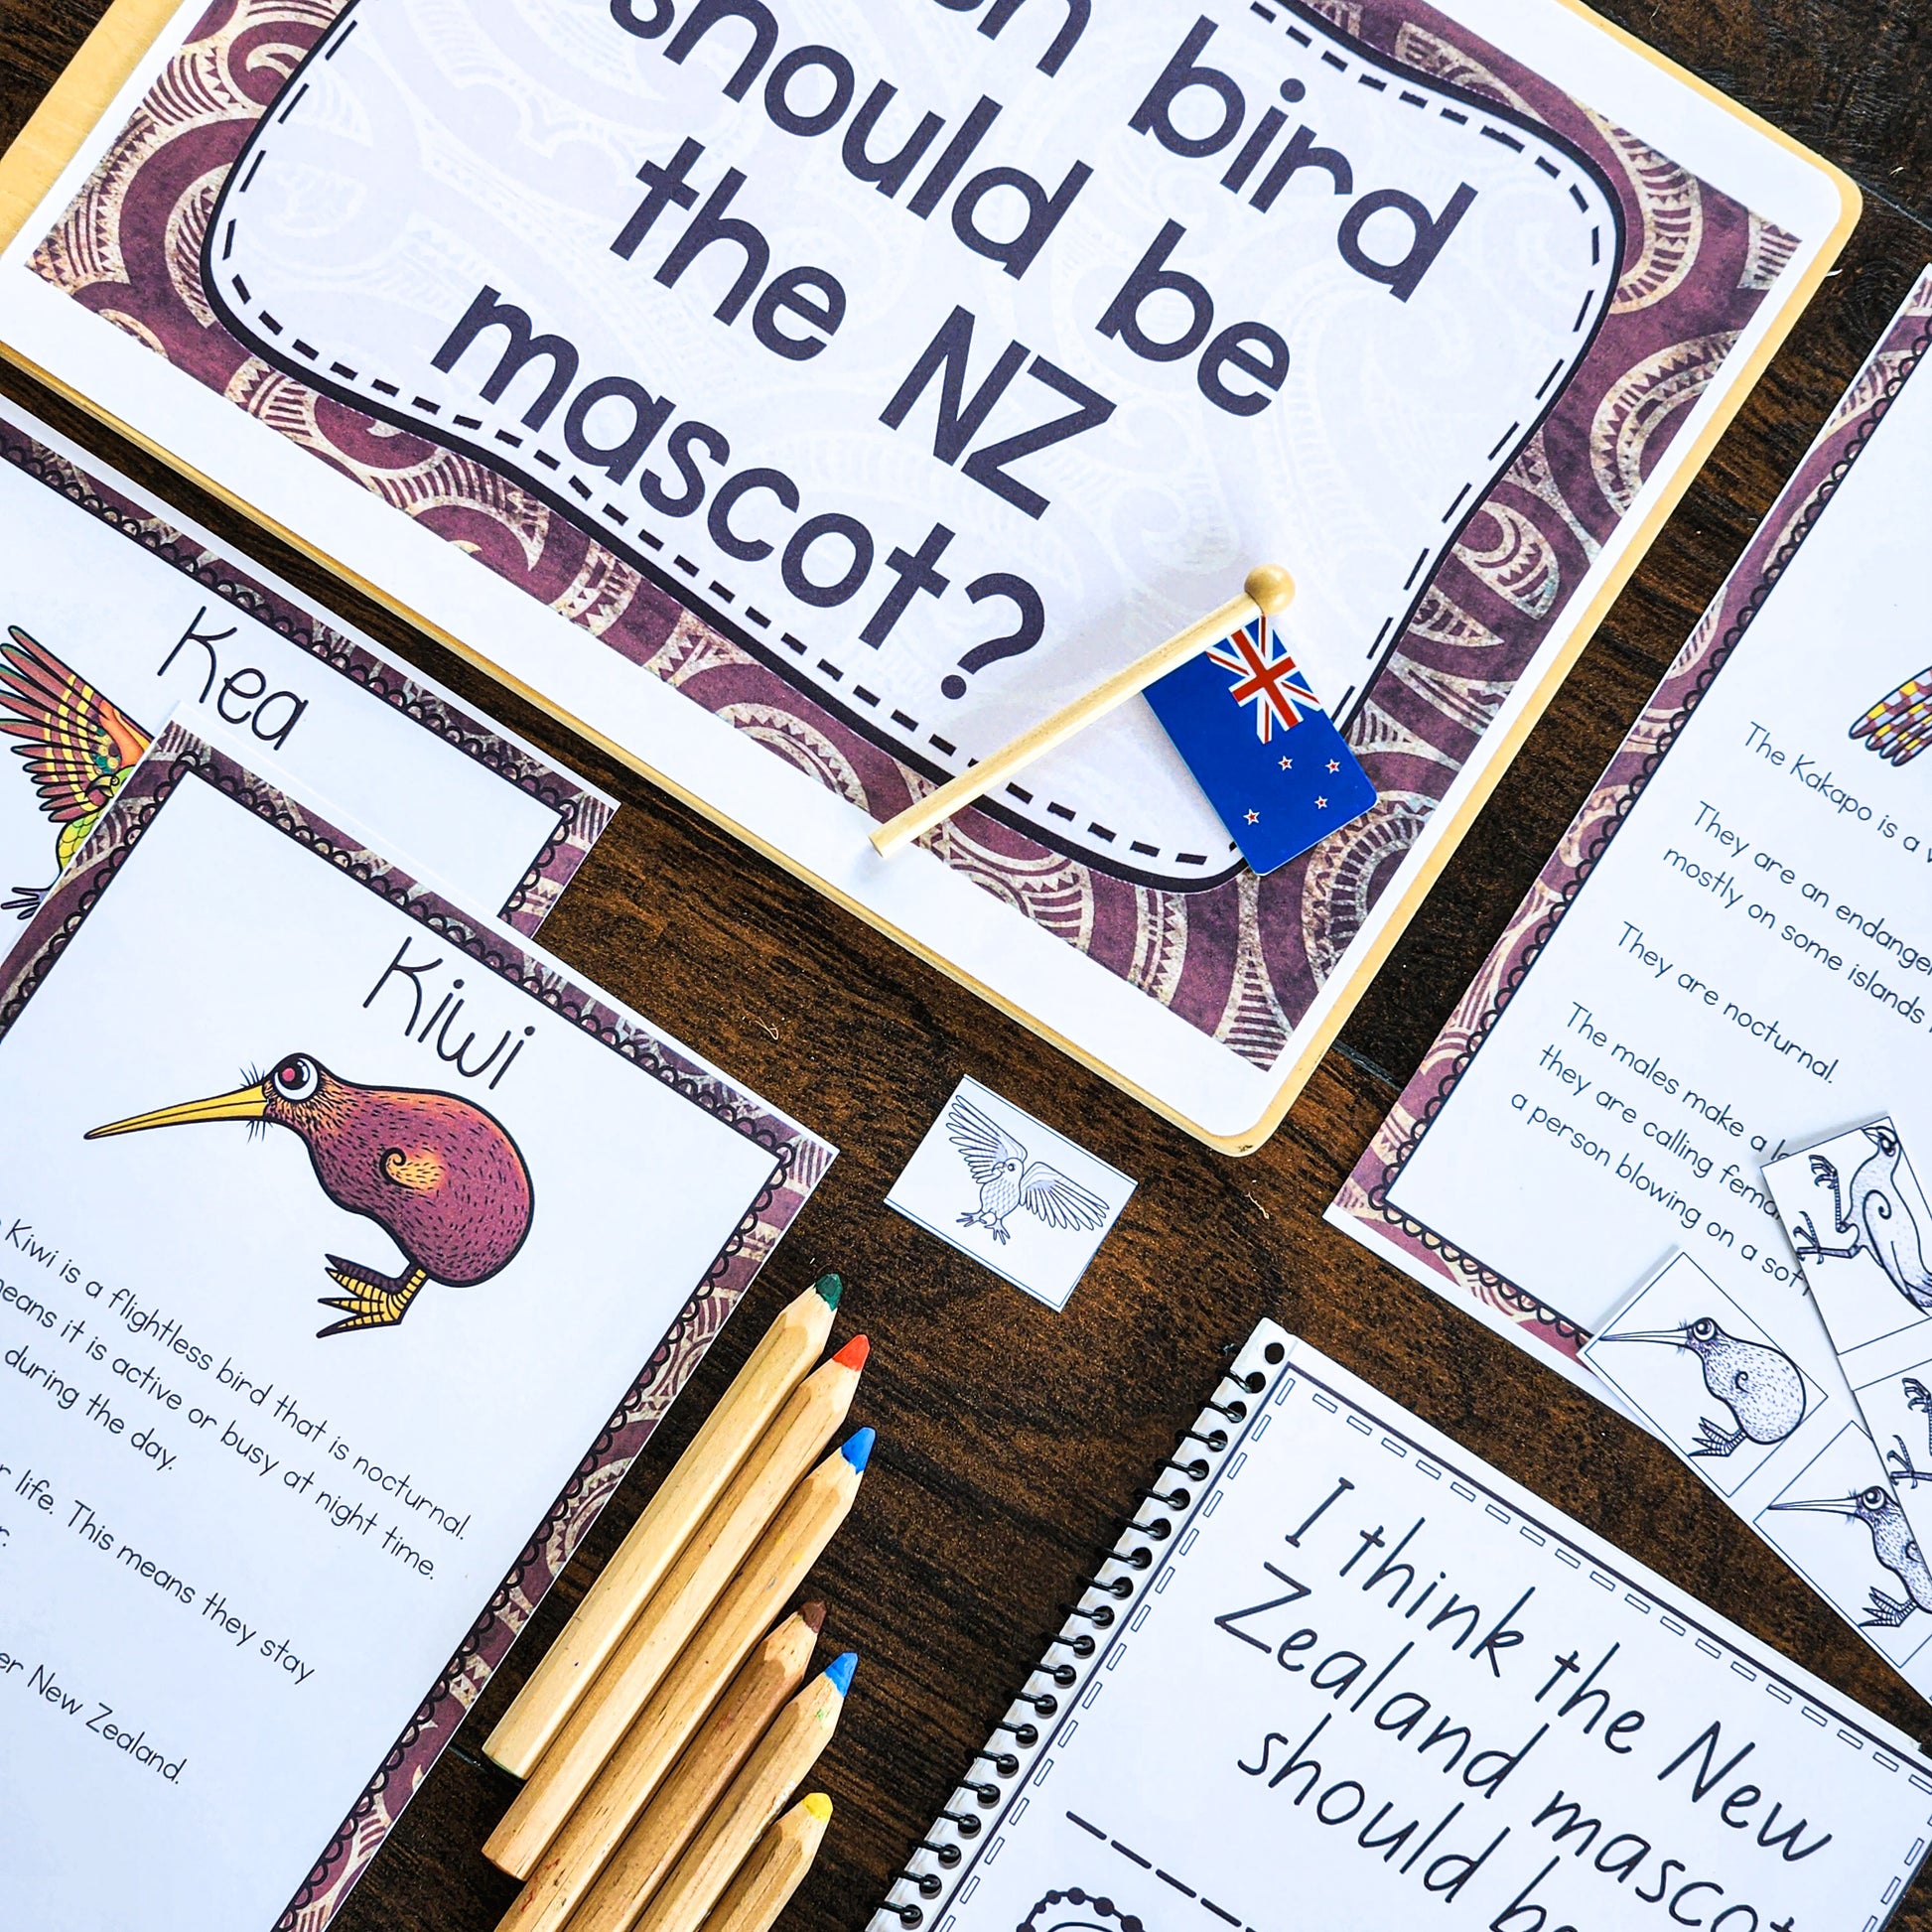 New Zealand Election Activity: Let's vote for our favourite bird - montessorikiwi